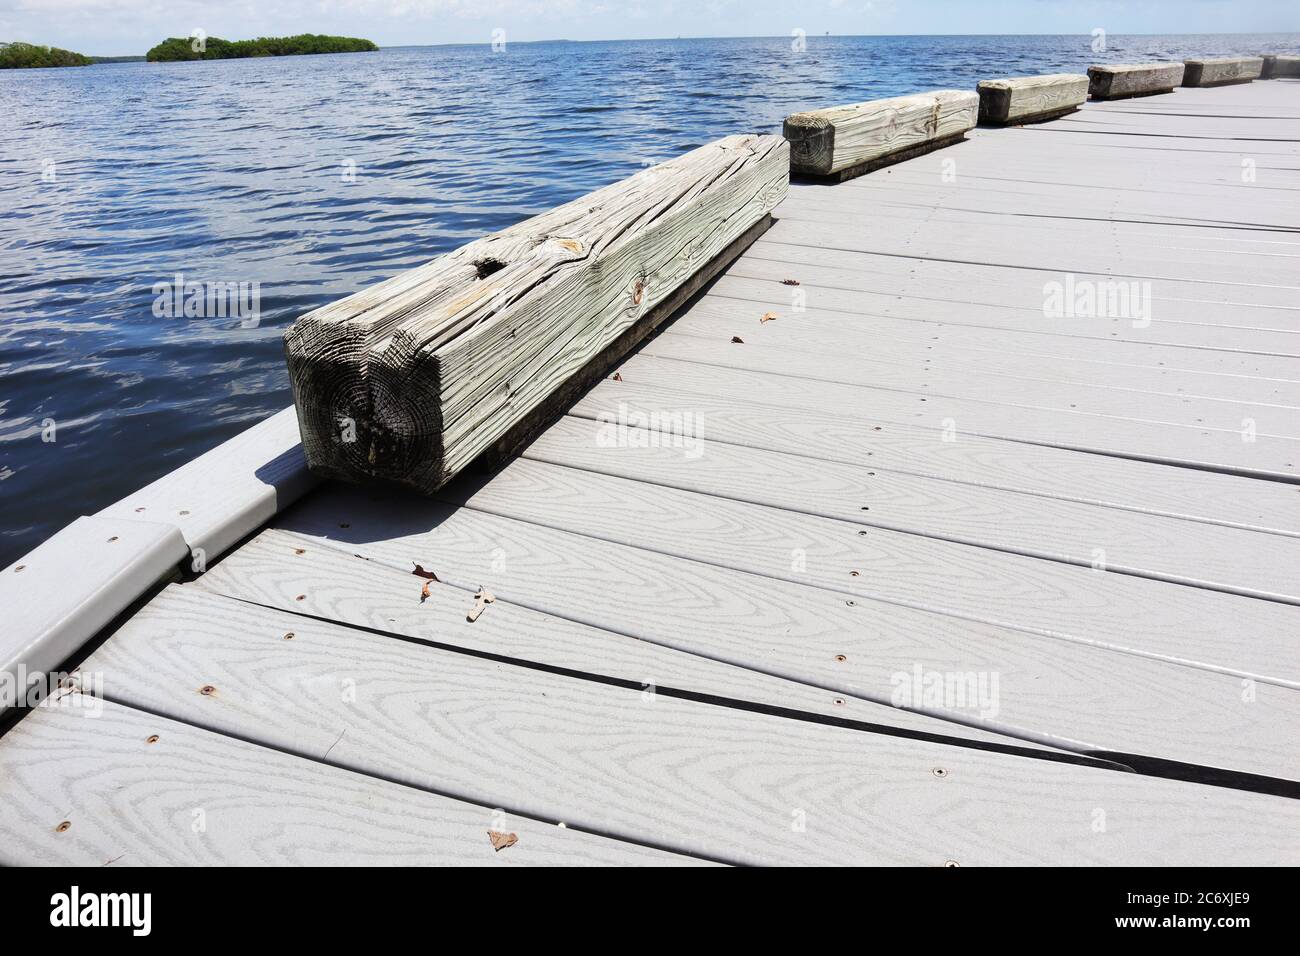 Dock located in Biscayne National Park in Homestead, Florida, Dock and blue ocean water. Stock Photo